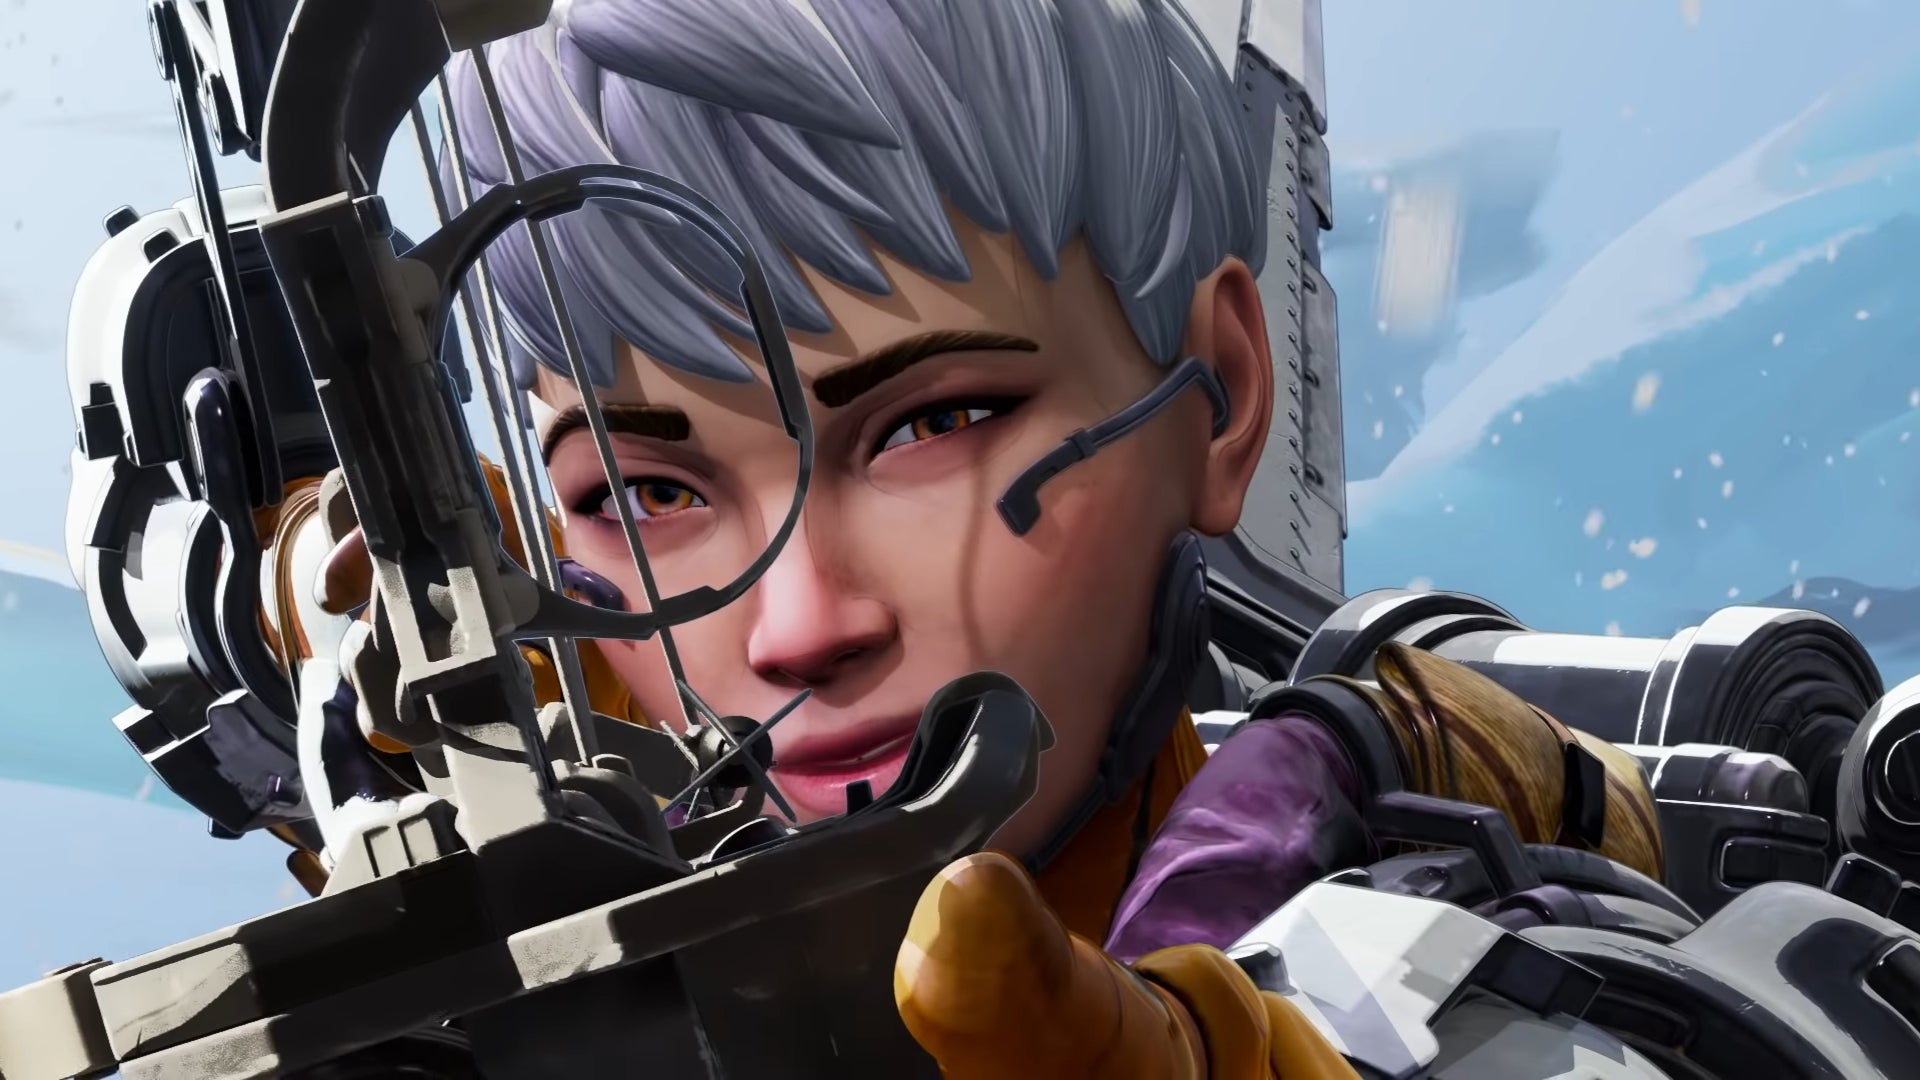 Valkyrie aims with her Bocek Bow towards the camera in Apex Legends.